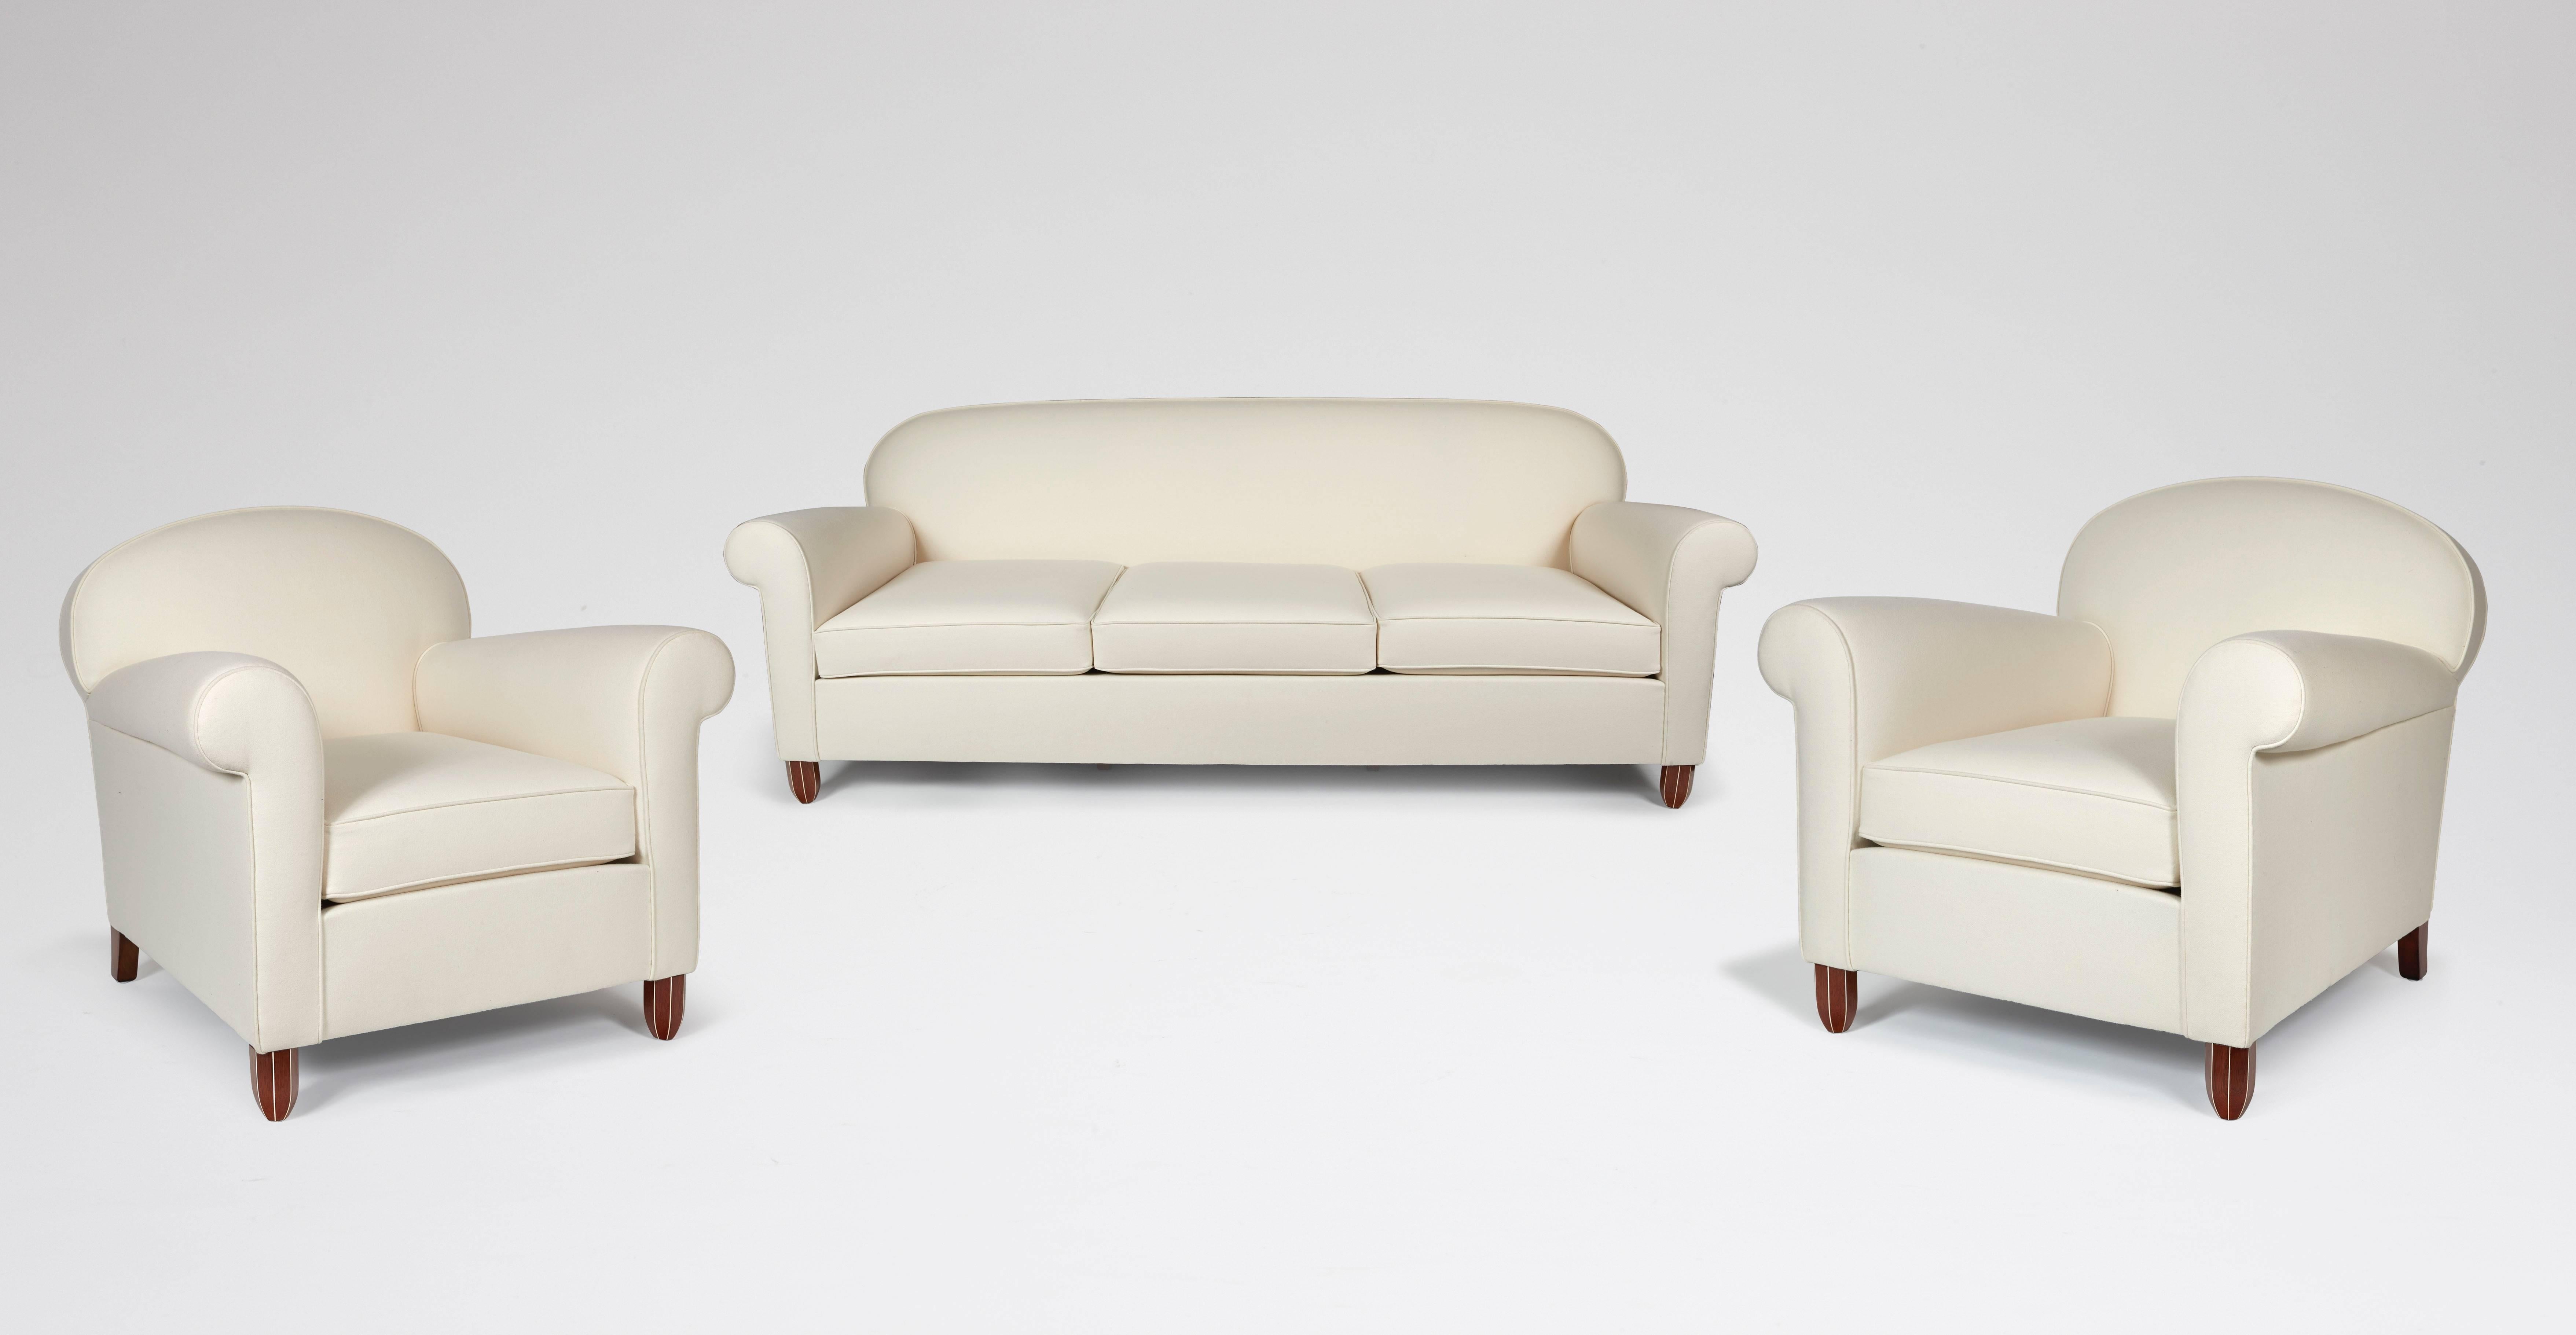 Composed of a three places sofa and two club armchairs covered with an ivory coton, round back and armrest, on natural wood legs highlightened by thin tricks of bone.

Sofa : H. 83 - L. 200 - P. 85 cm
Armchairs : H. 46 - L. 65 - P. 54 cm